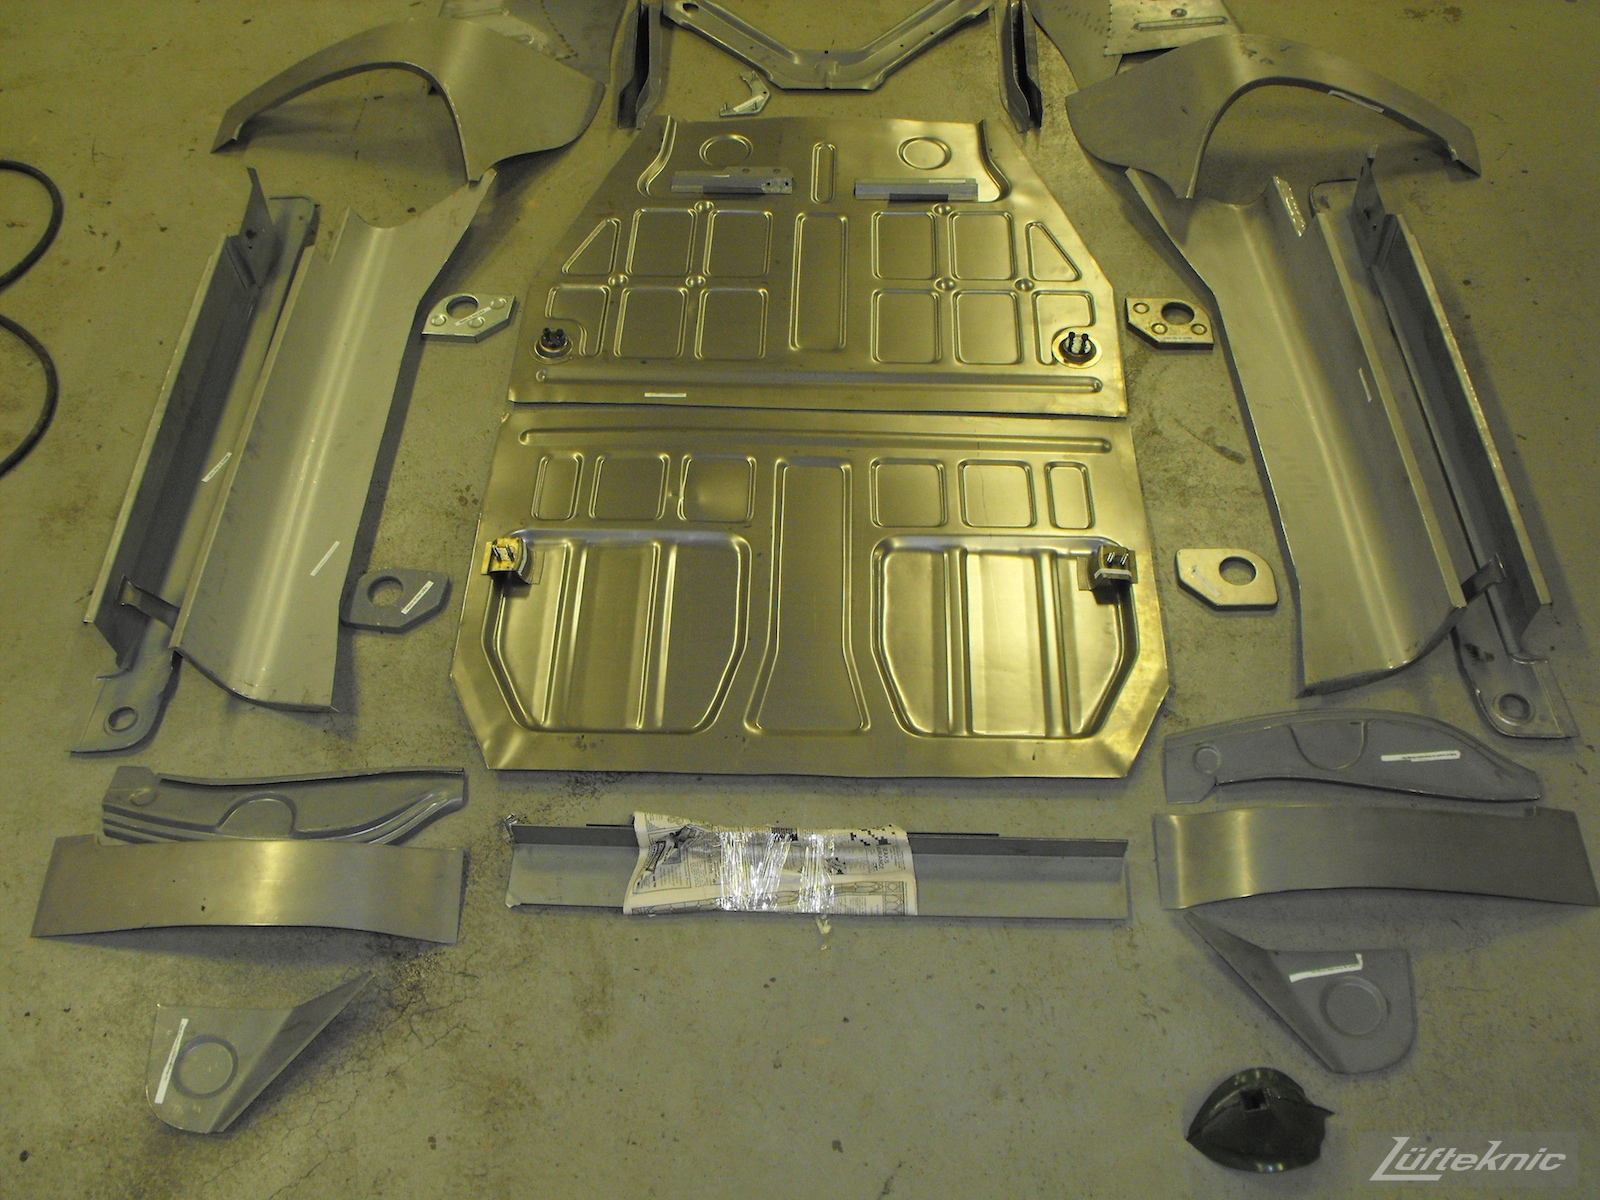 New floors and panels laid out on the ground for a 1961 Porsche 356B Roadster restoration.